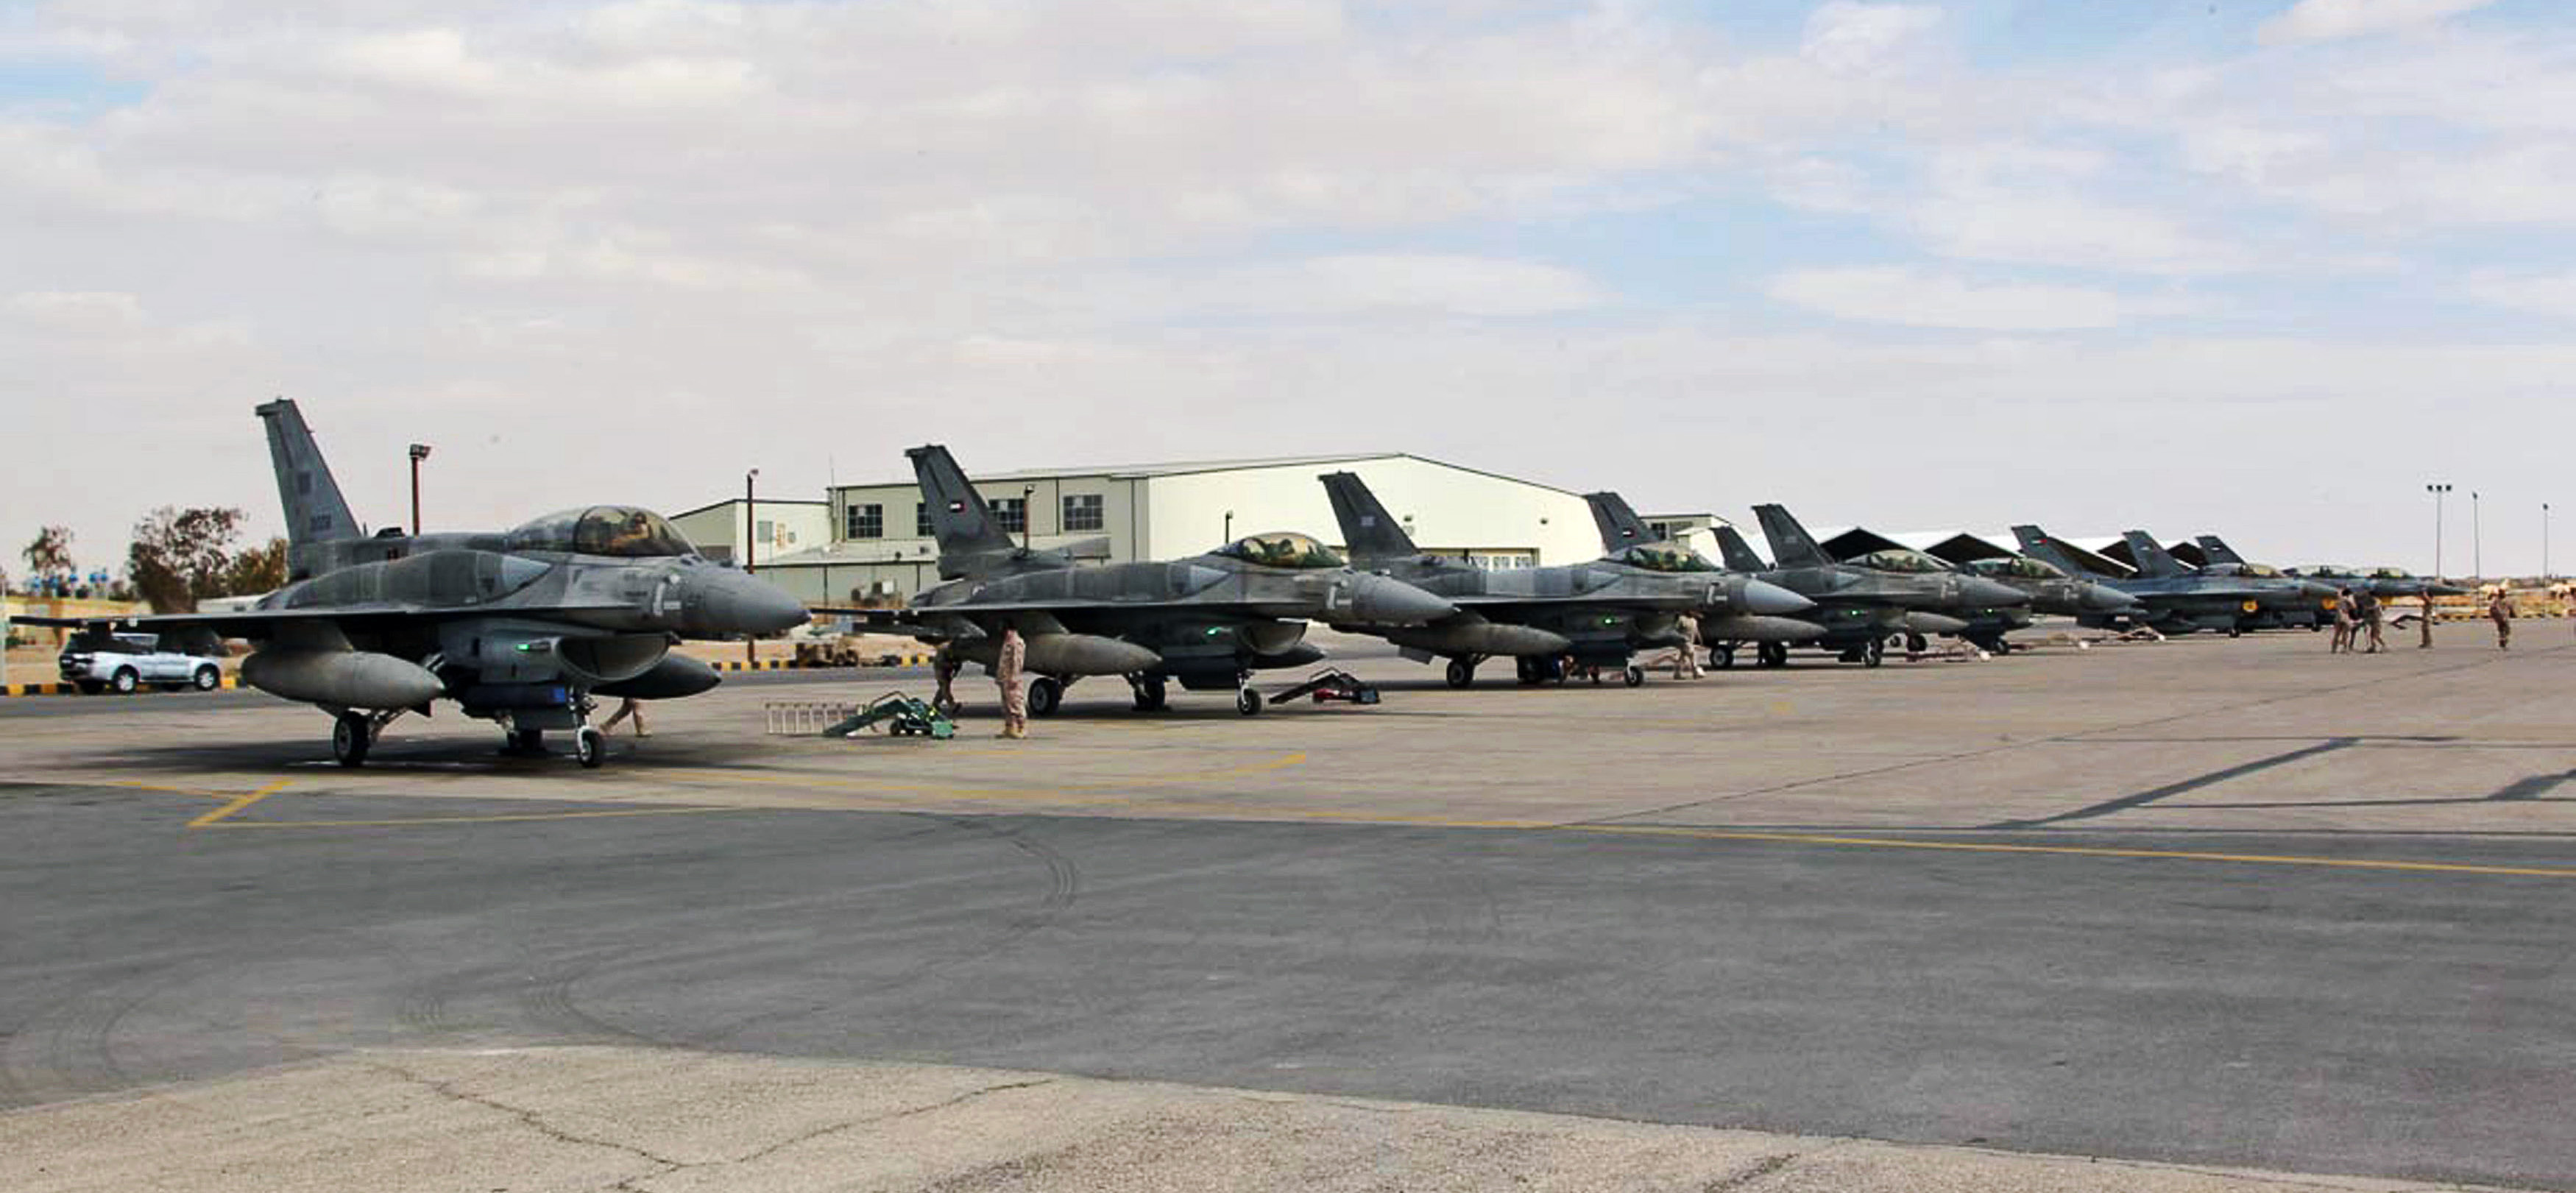 F16 fighter jets from the United Arab Emirates (UAE) arrive at an air base in Jordan